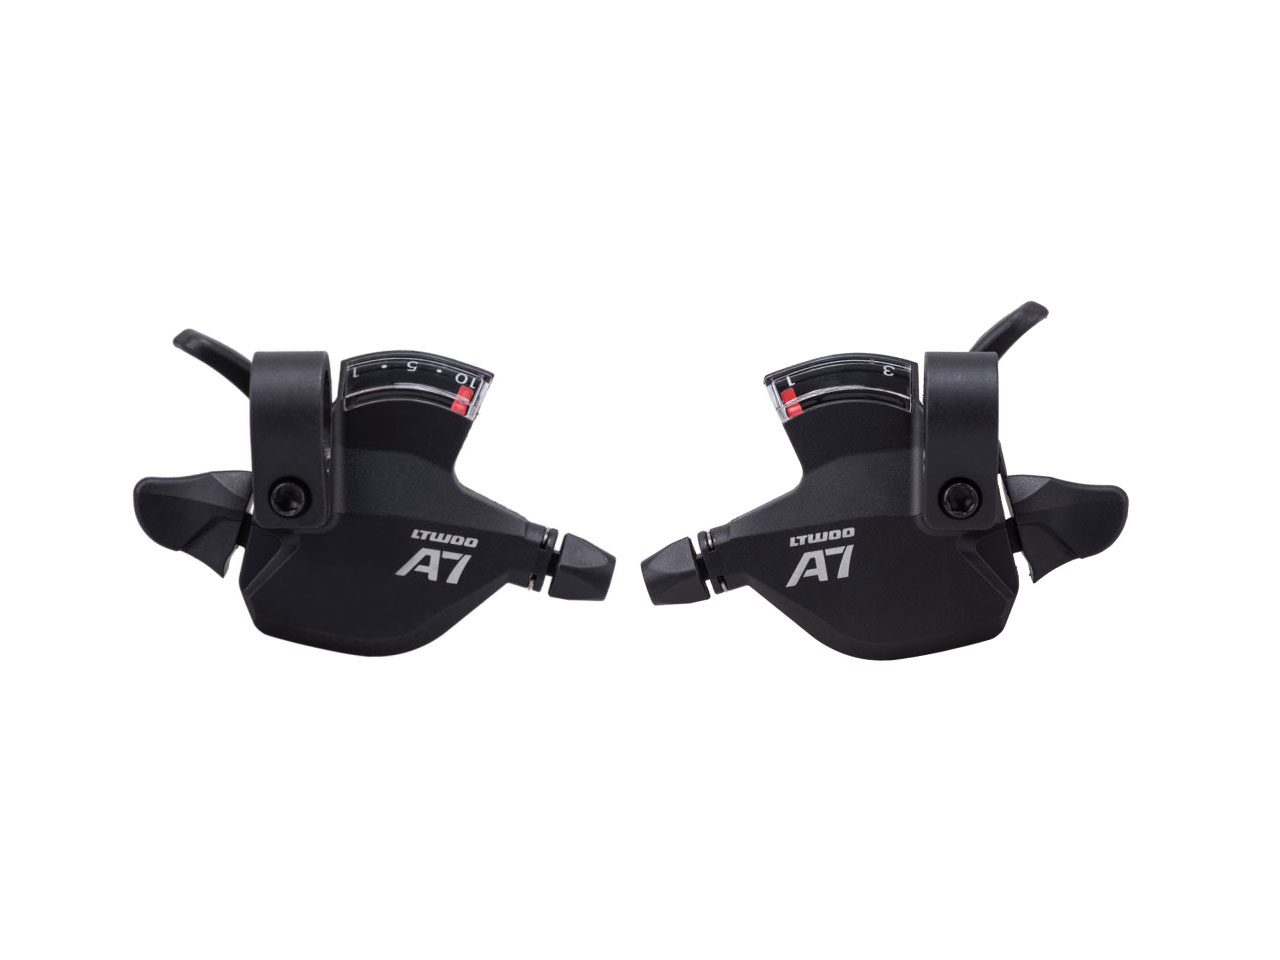 LTWOO A7 2/3X10 Speed Shifter Sram Compatible